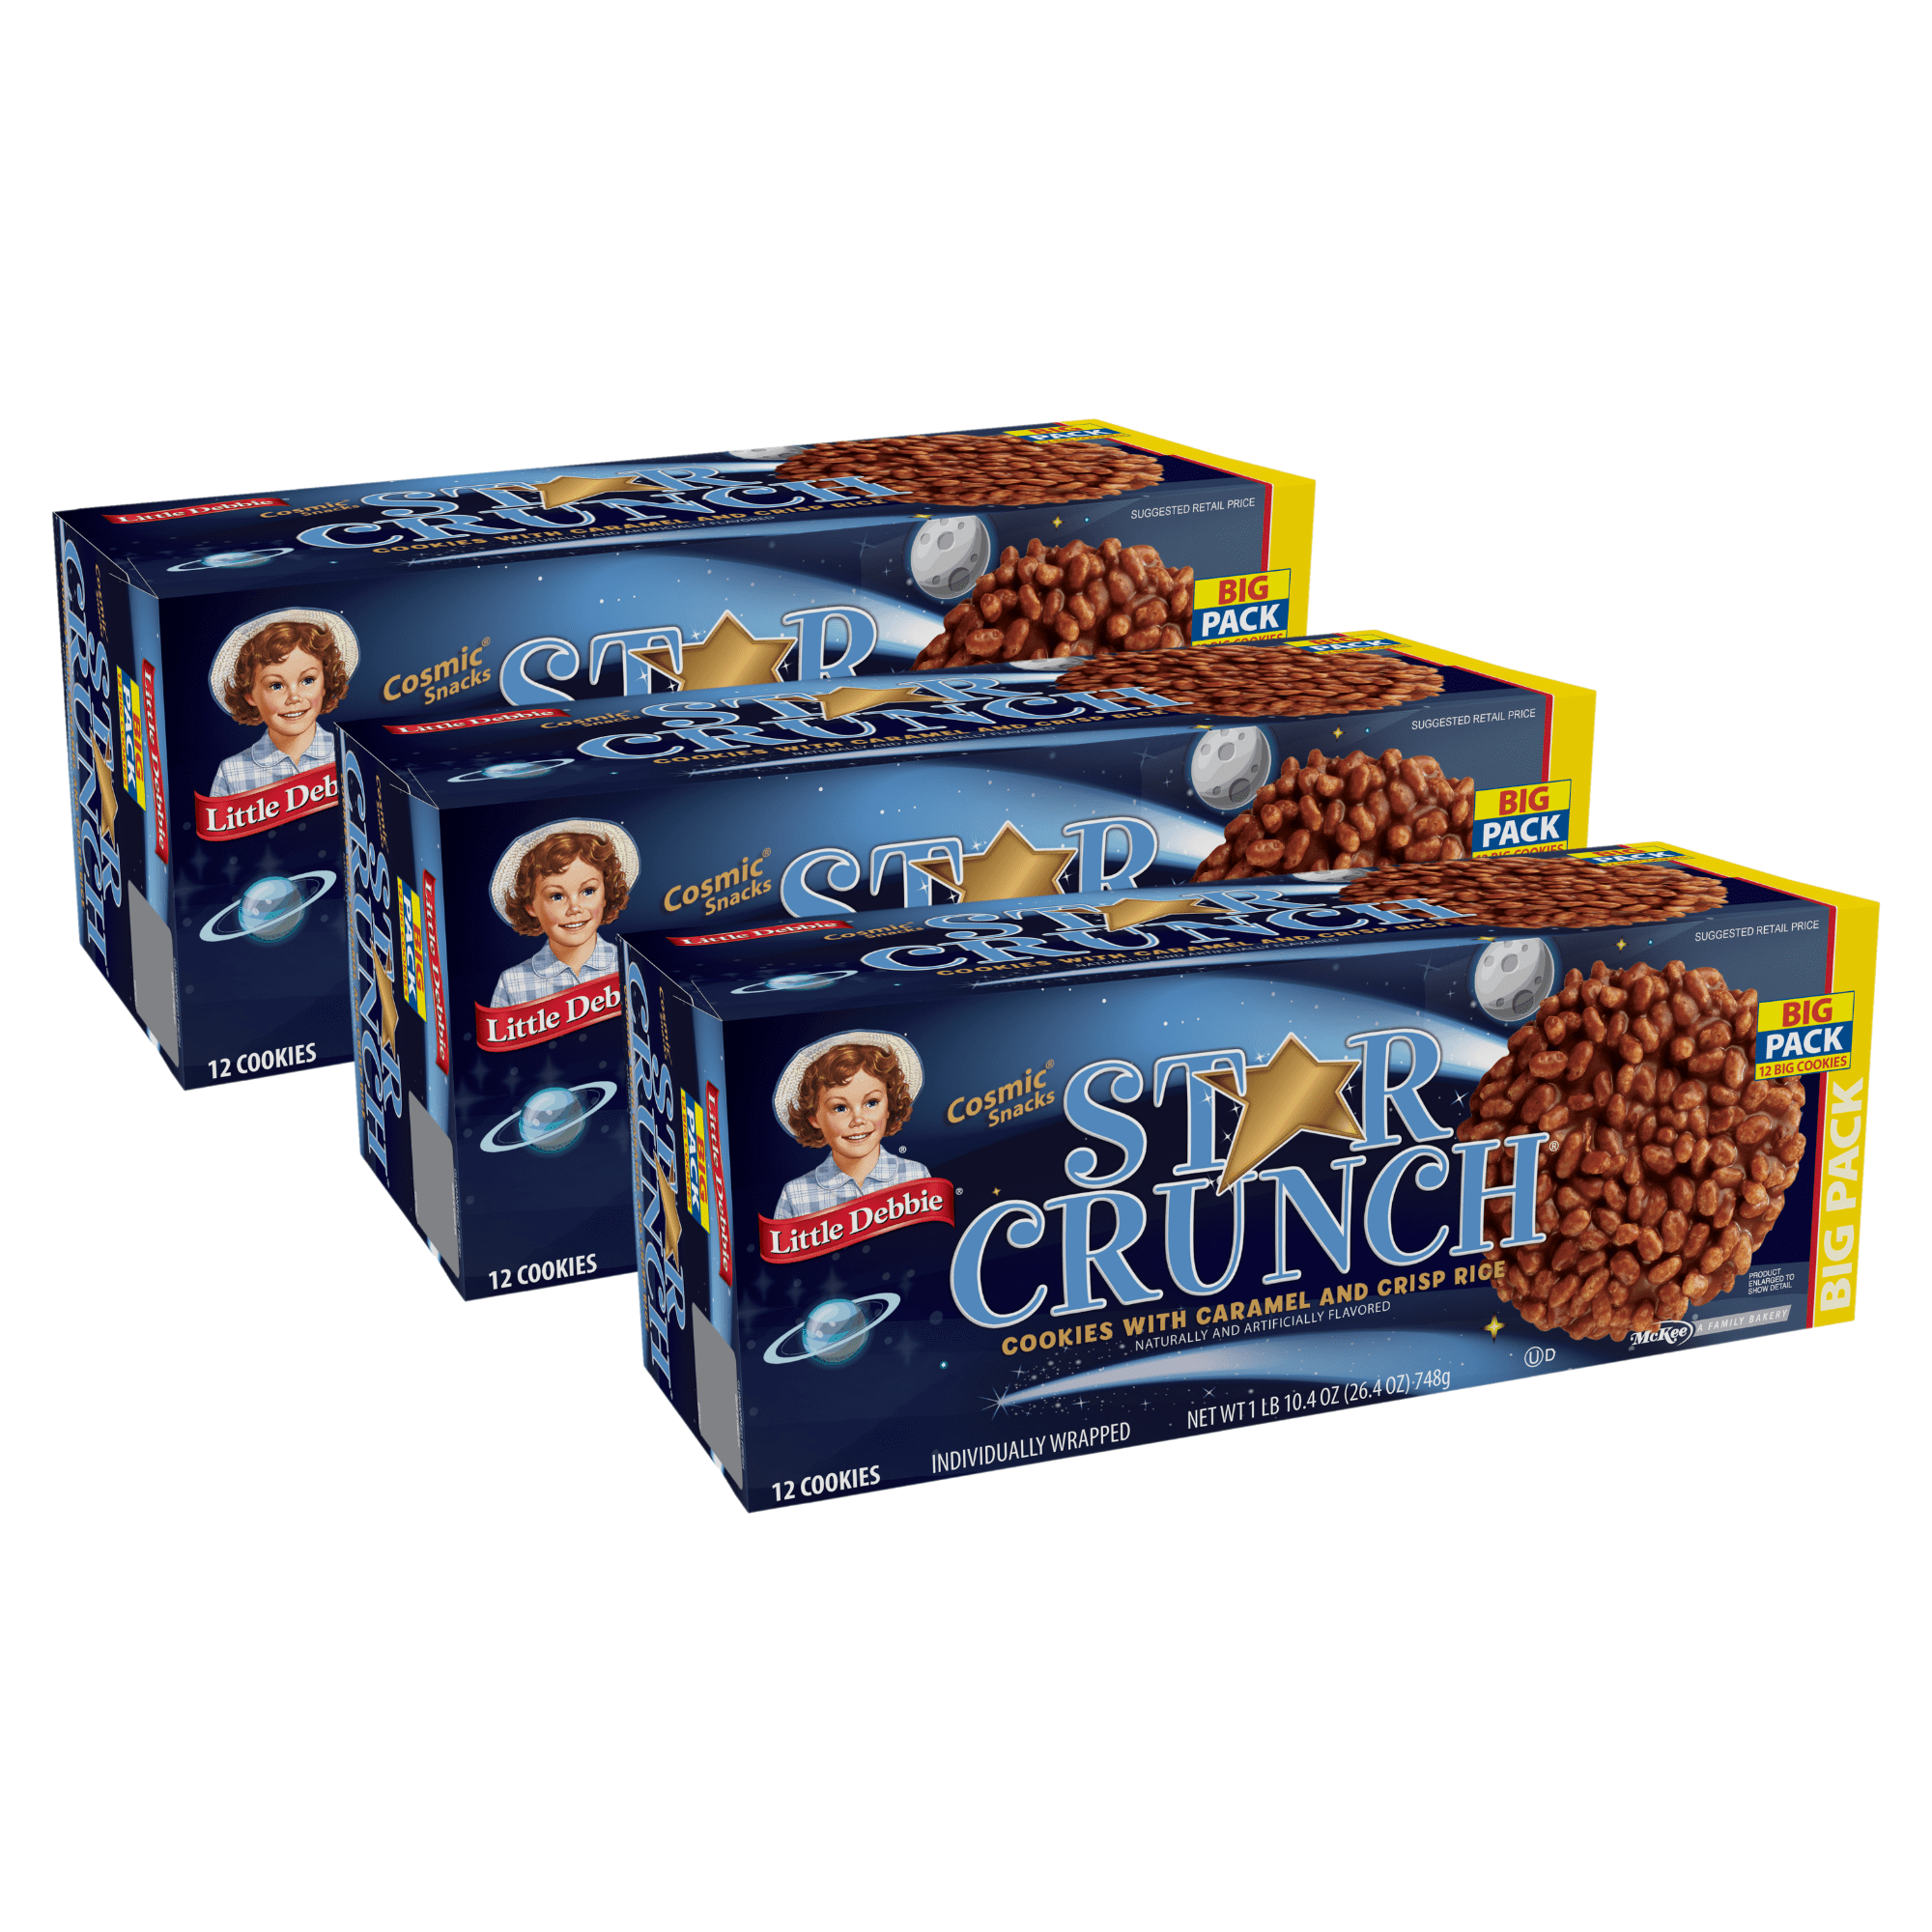 Crunchy Chocolate Chip Cookies 1.09 oz (Pack of 6), SnackMagic